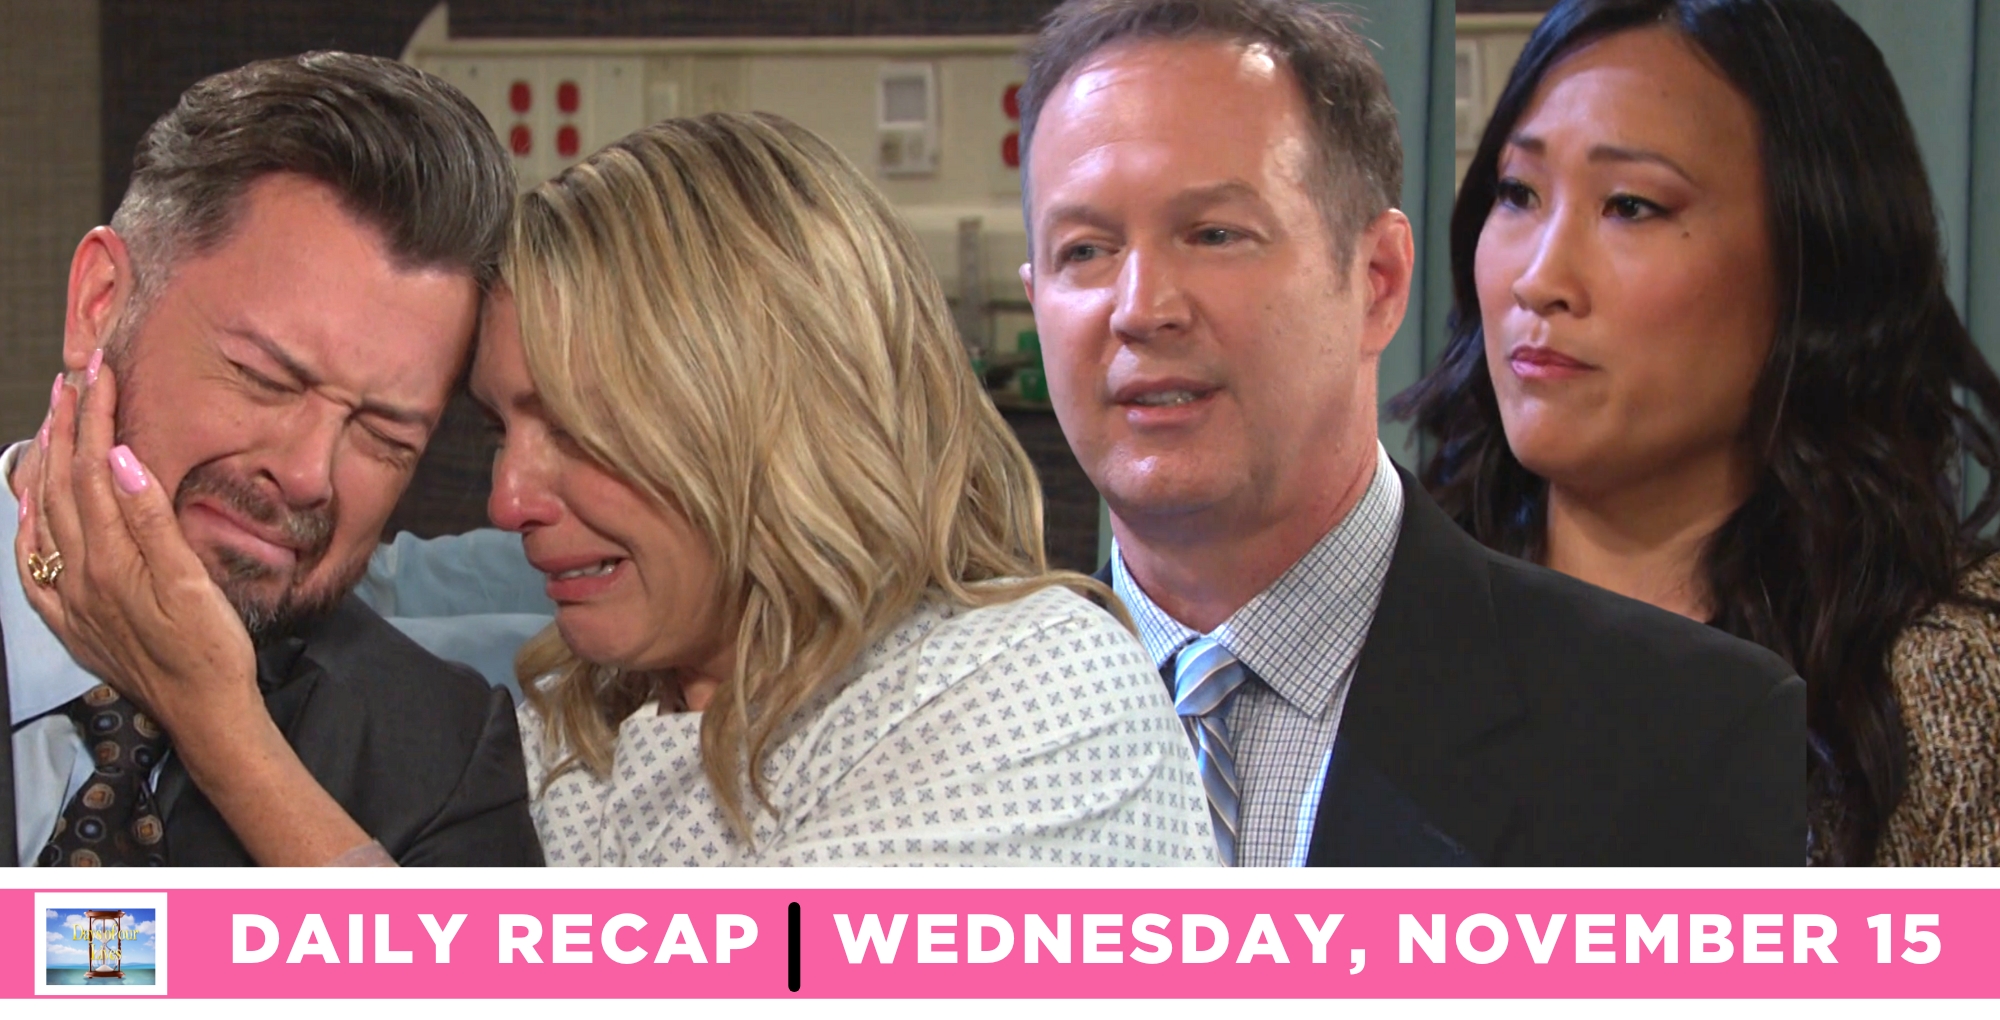 melinda trask pulled the ultimate con against nicole walker dimera and ej dimera on the days of our lives recap for wednesday, november 15, 2023.